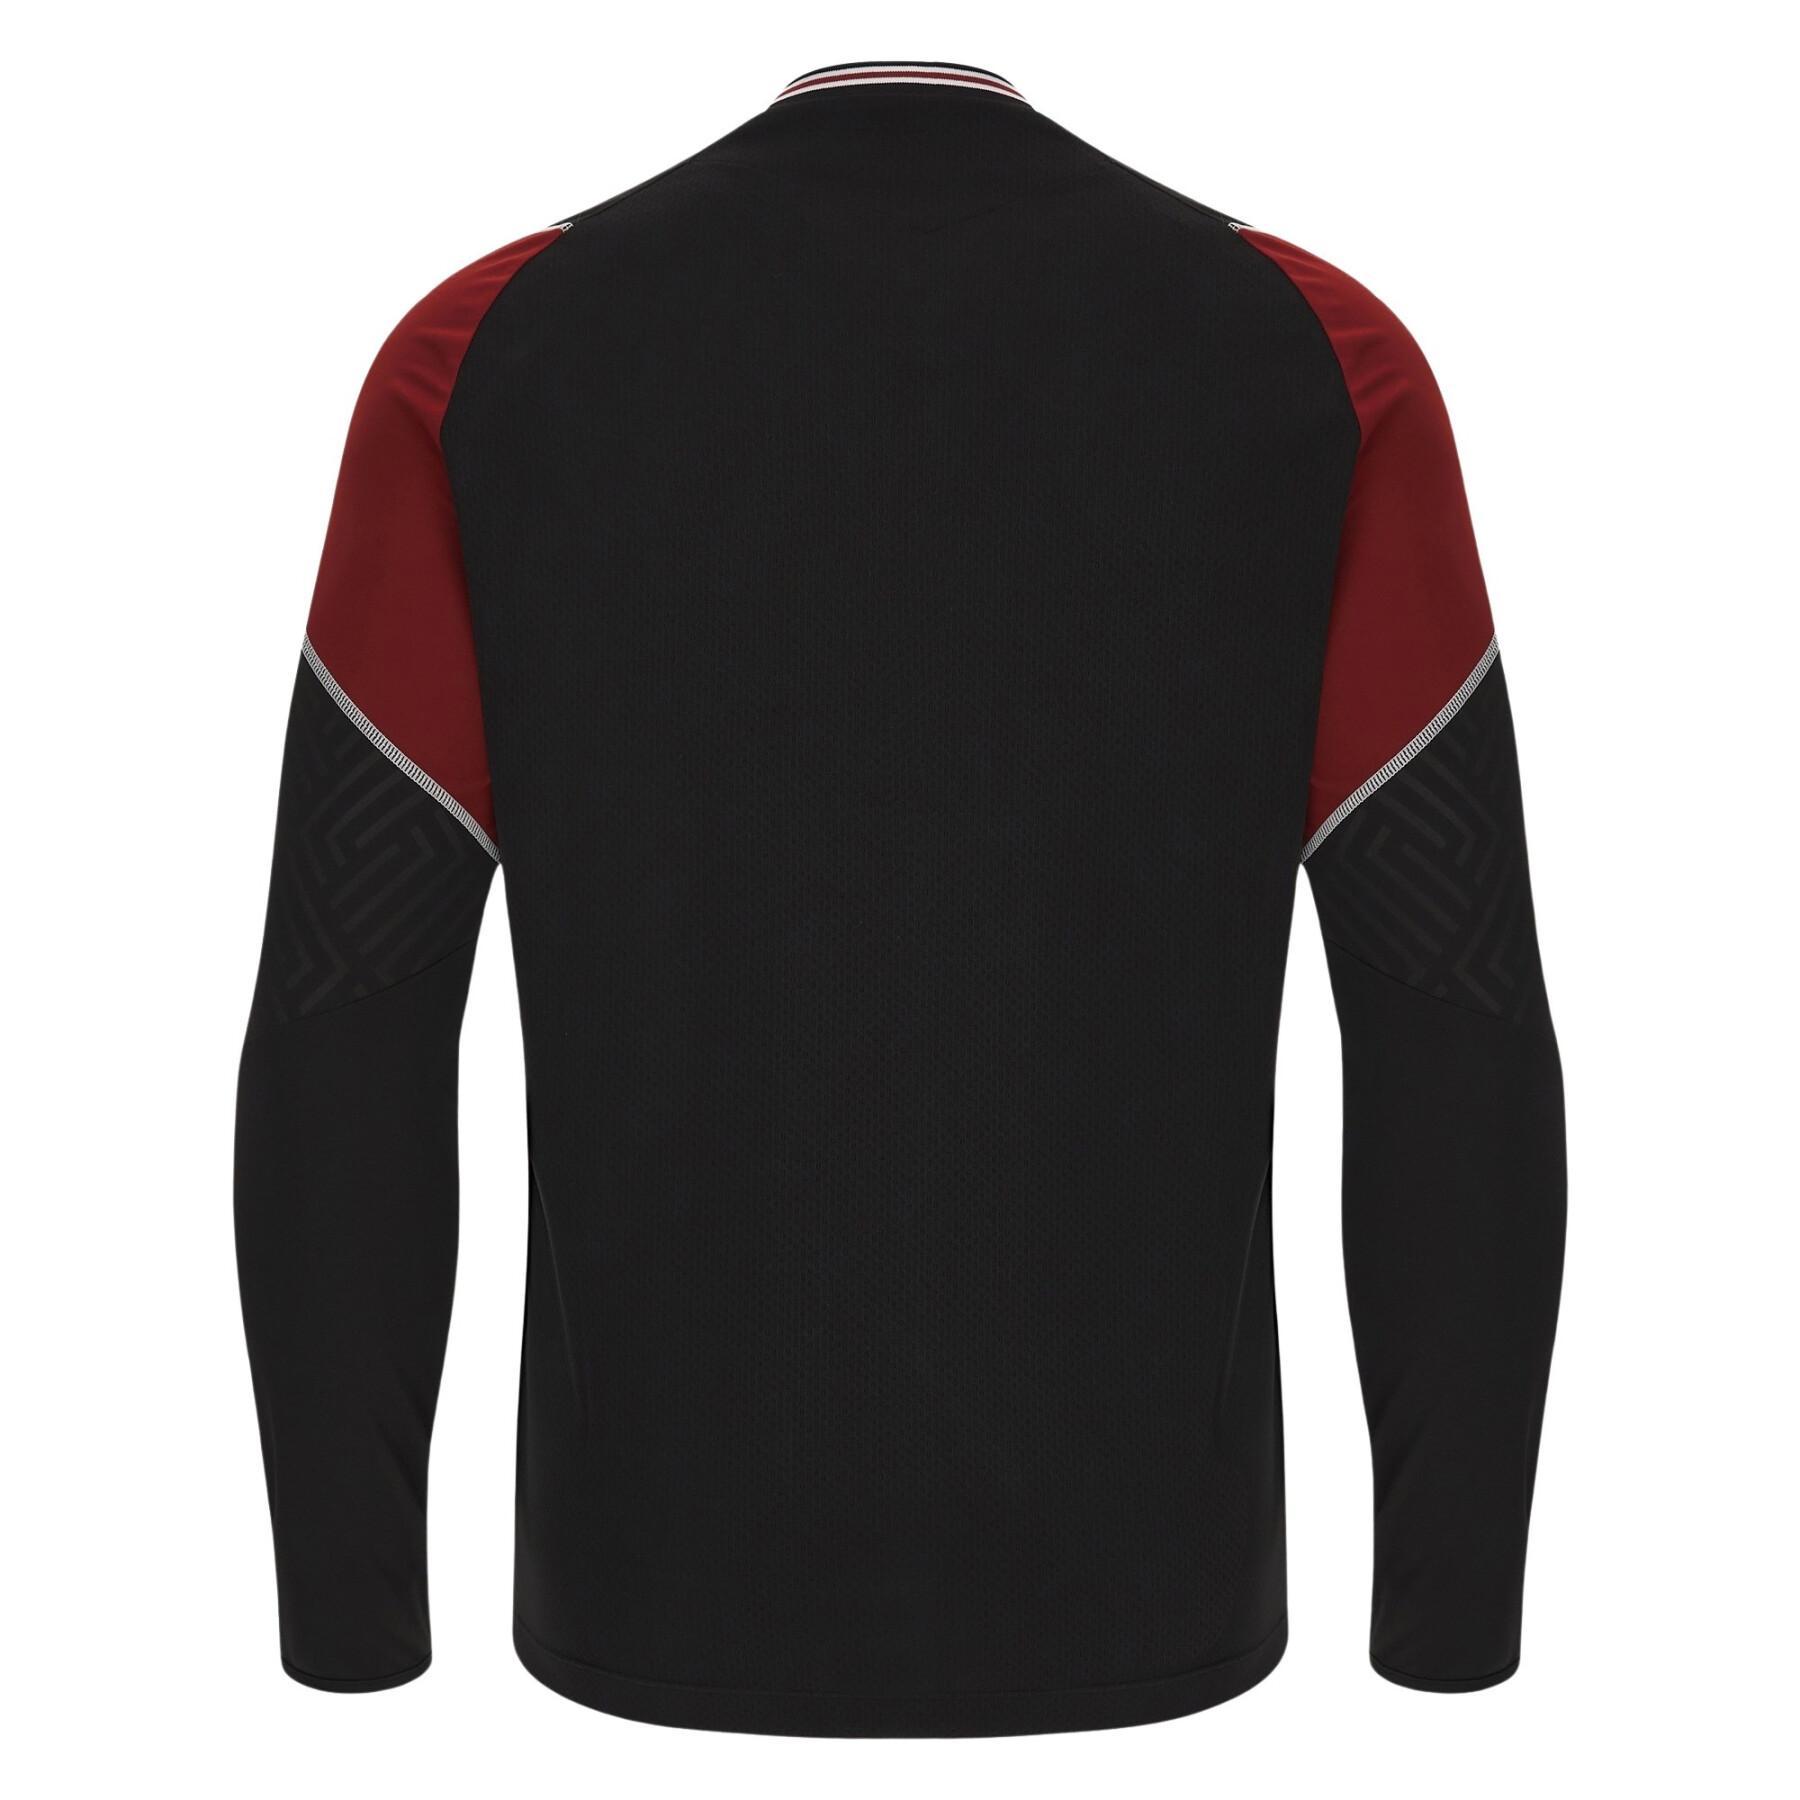 Long-sleeved training jersey Pays de Galles RWC 2023